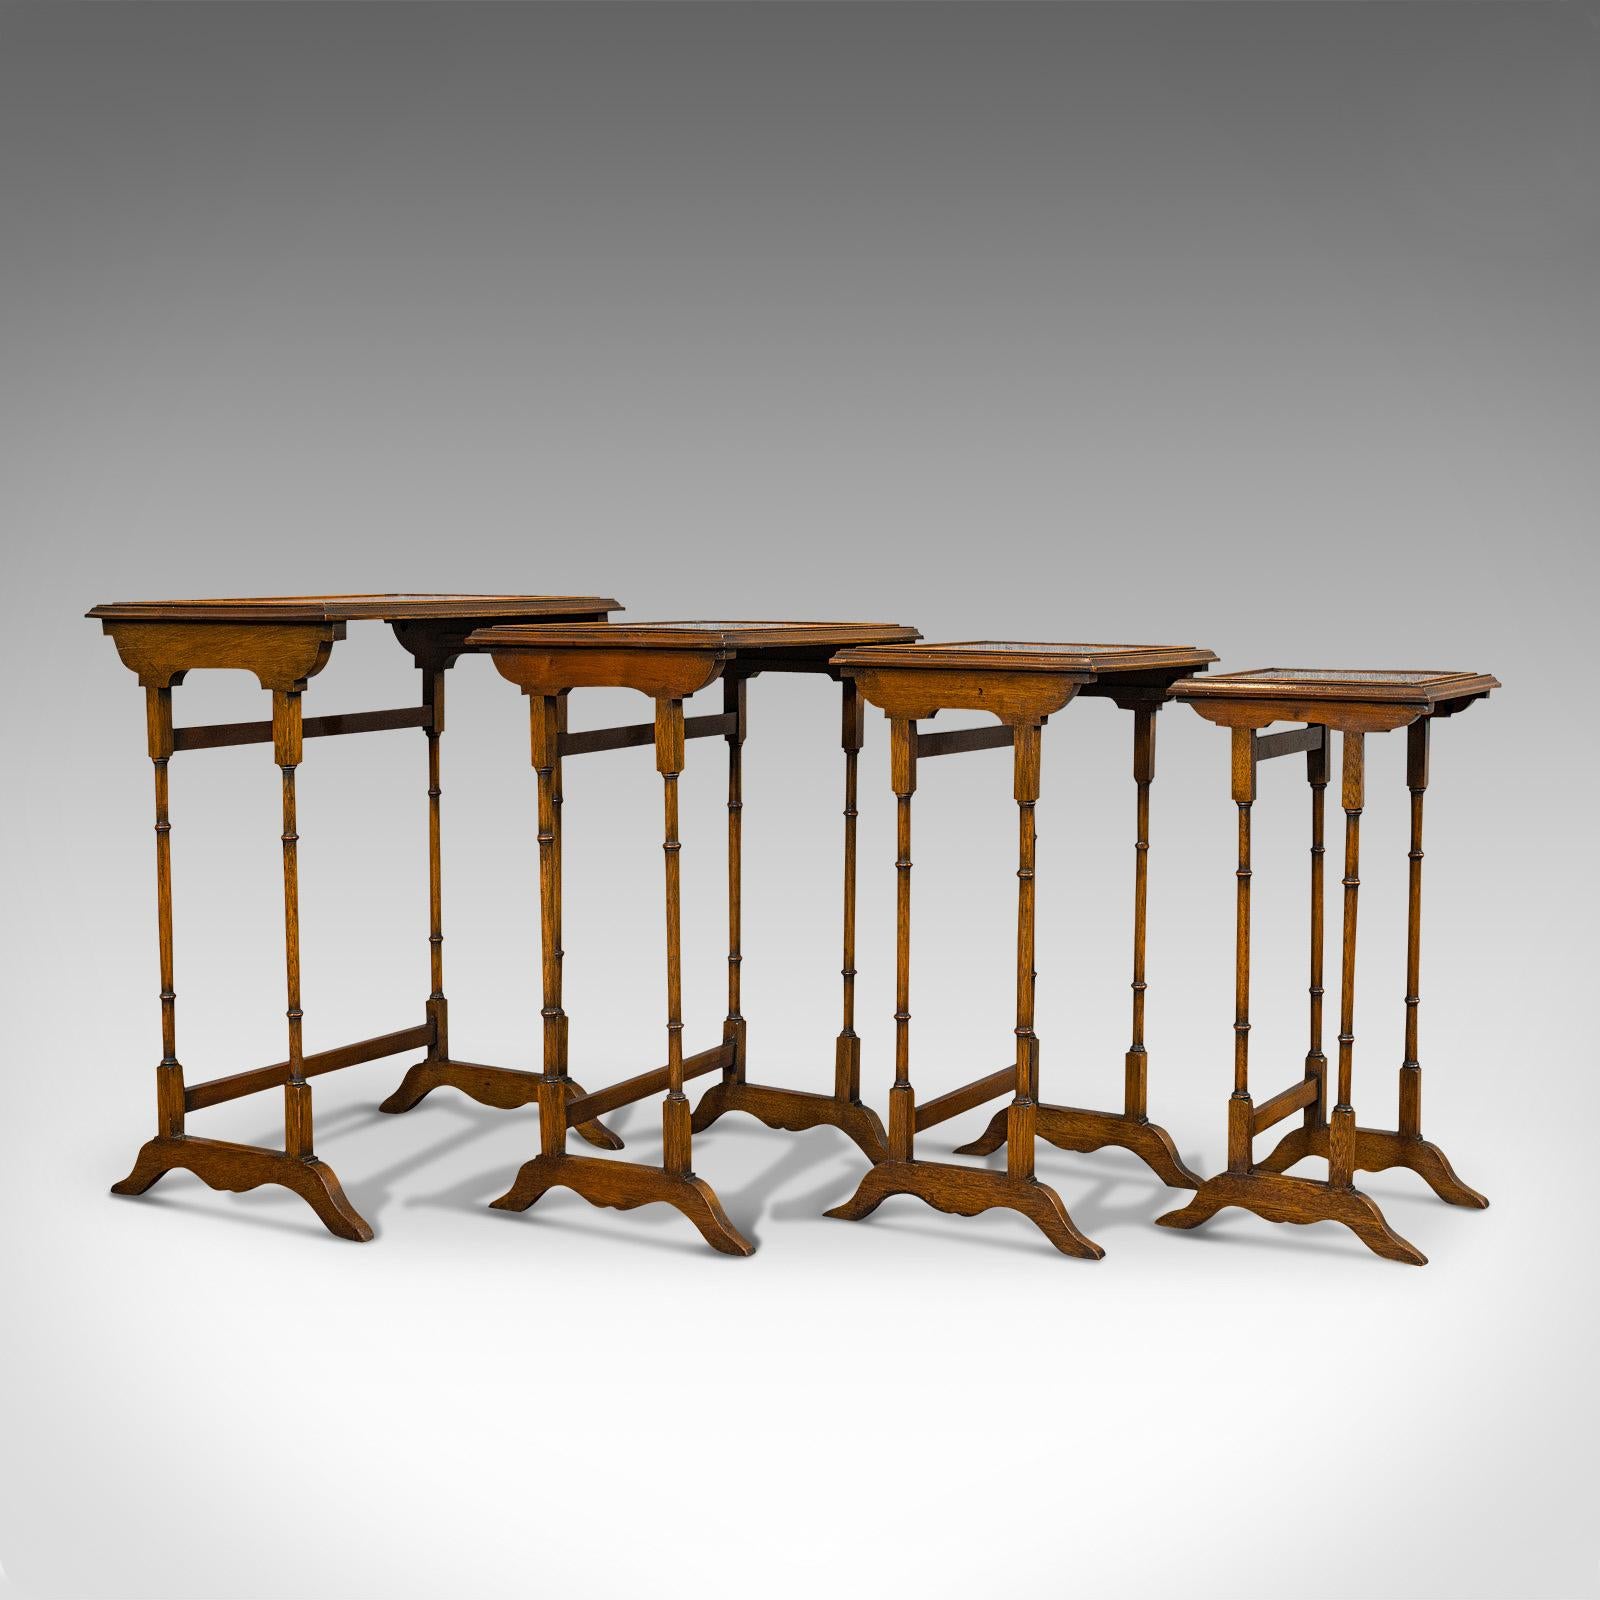 This is an antique quartetto of tables. An English, walnut over mahogany set of nest tables, dating to the Edwardian period, circa 1910.

Of quality craftsmanship, strongly jointed and robust
Displaying a desirable aged patina
Superb walnut with